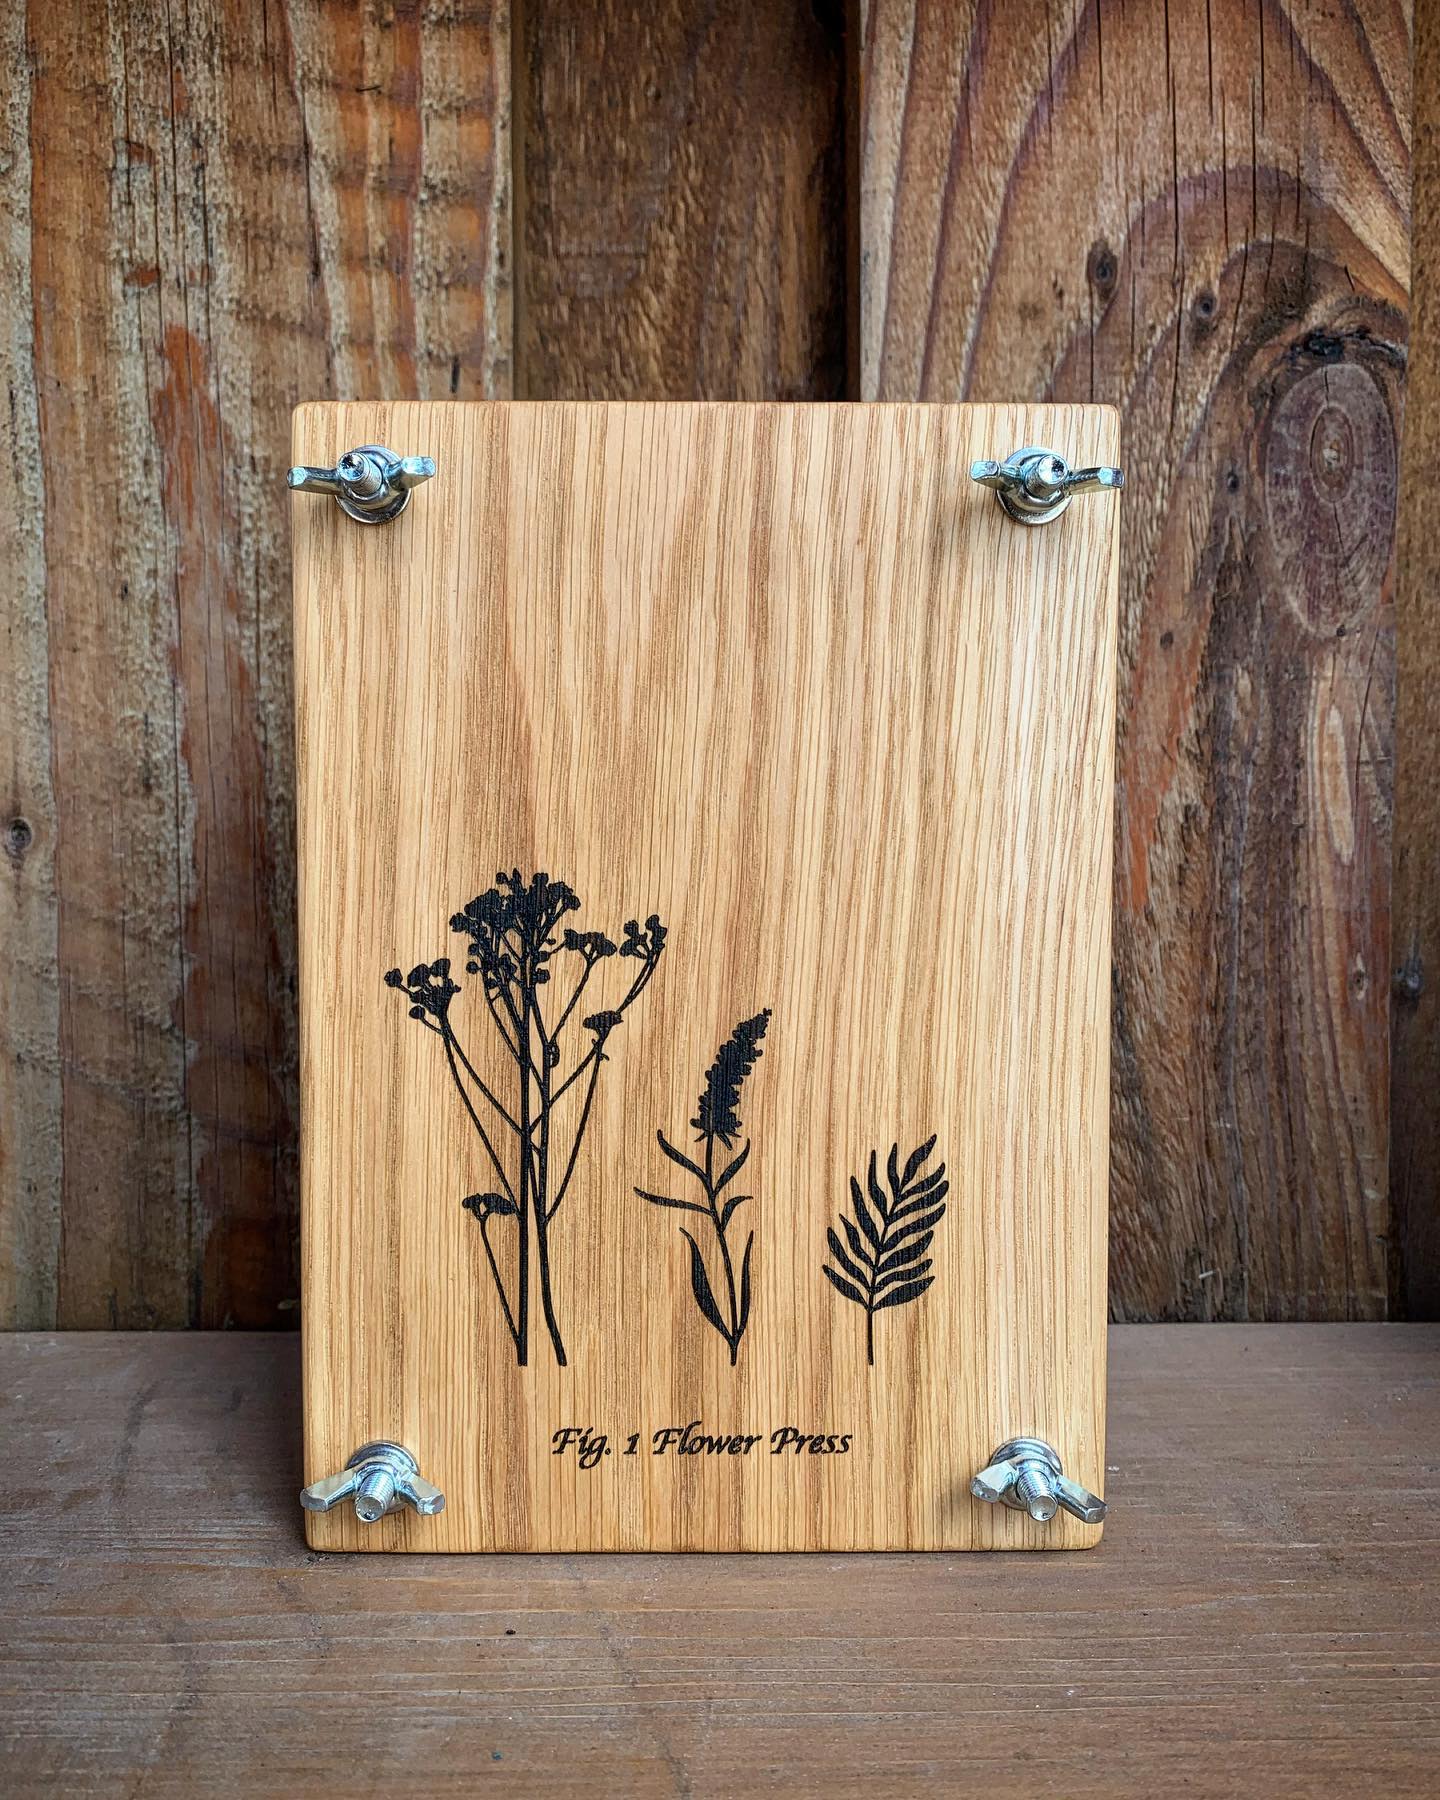 NEW PRODUCT!Our handcrafted Oak Flower Press is now available at markets and events… soon to be added to the website. £25Today we are in Saltford at the artisan market @flourishglenavon